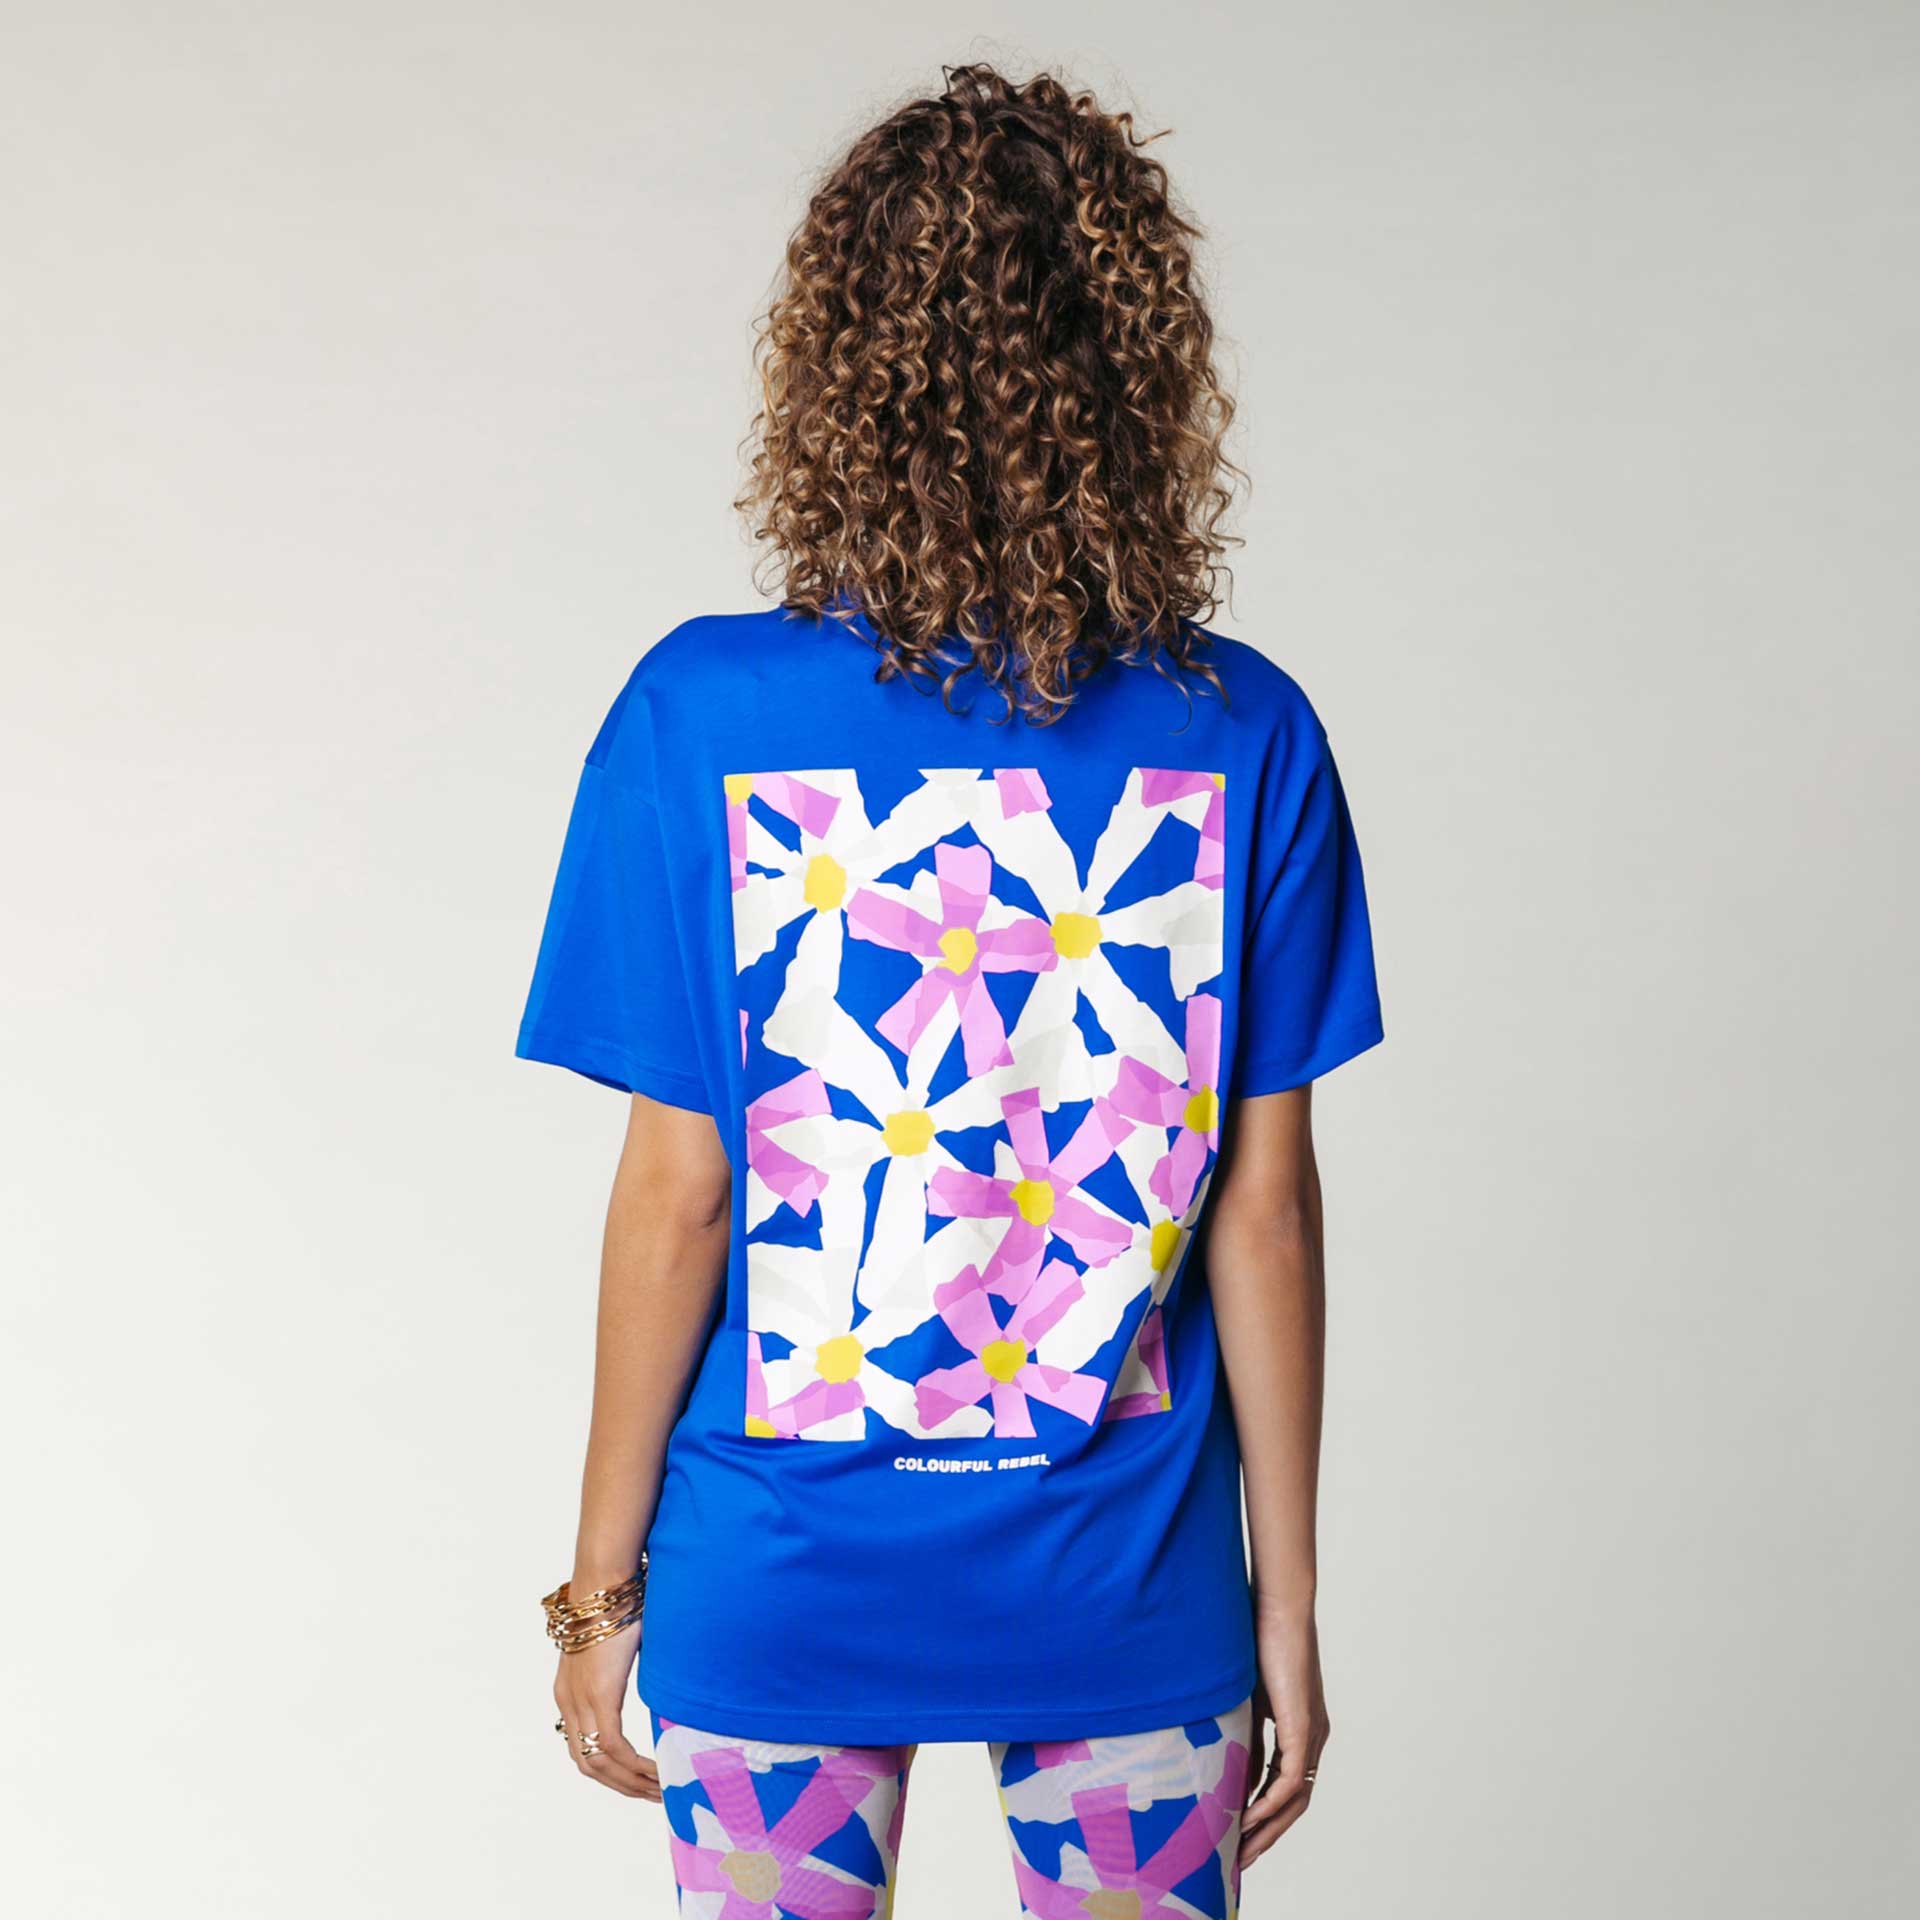 Colourful Rebel T-shirt Flowers Square 1